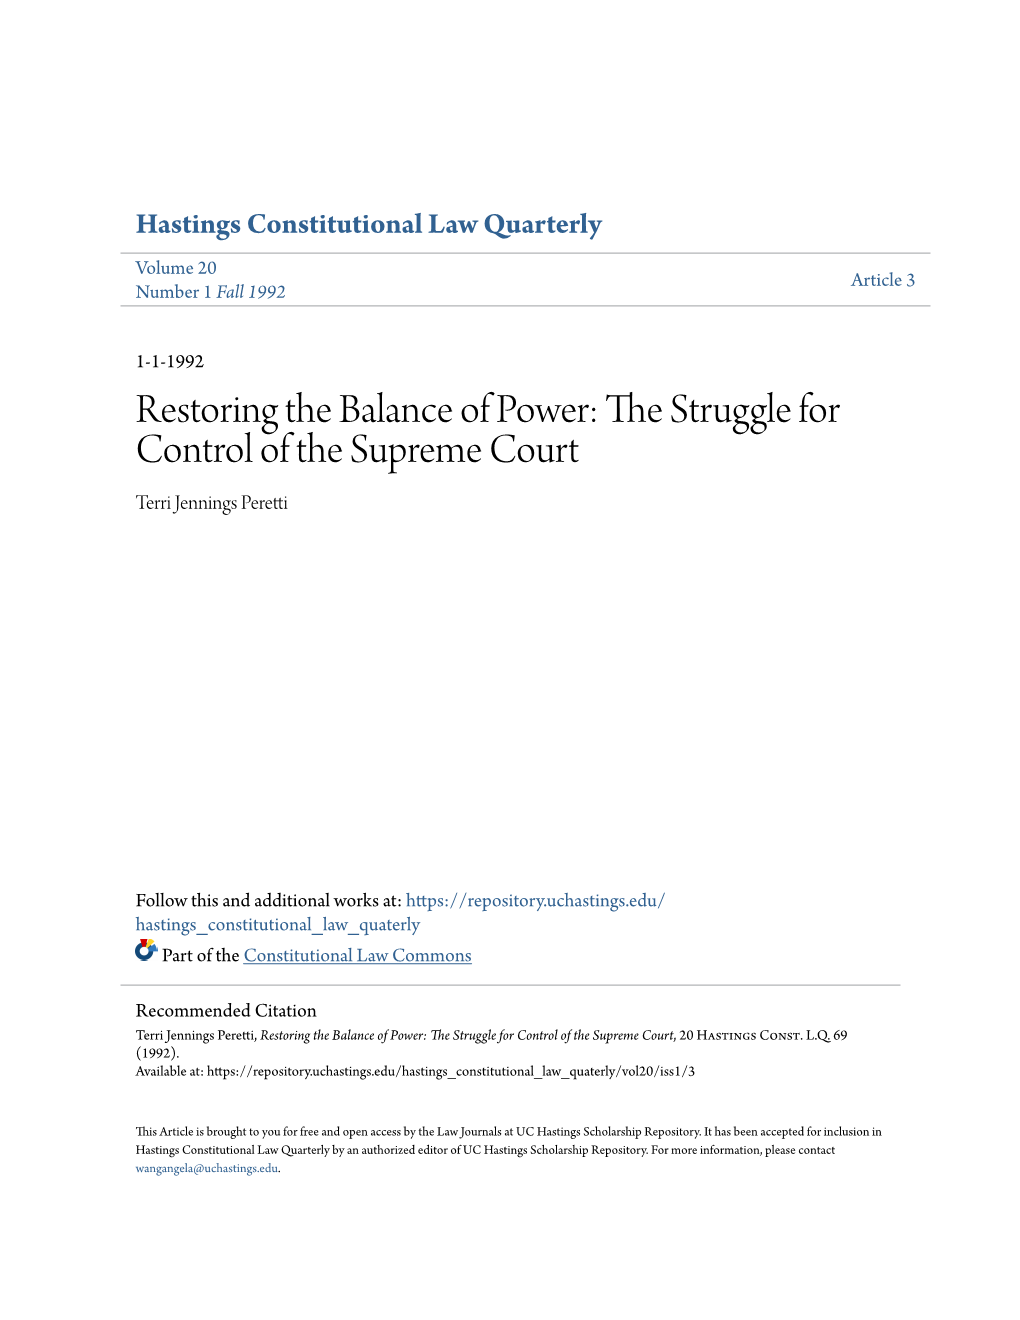 The Struggle for Control of the Supreme Court, 20 Hastings Const